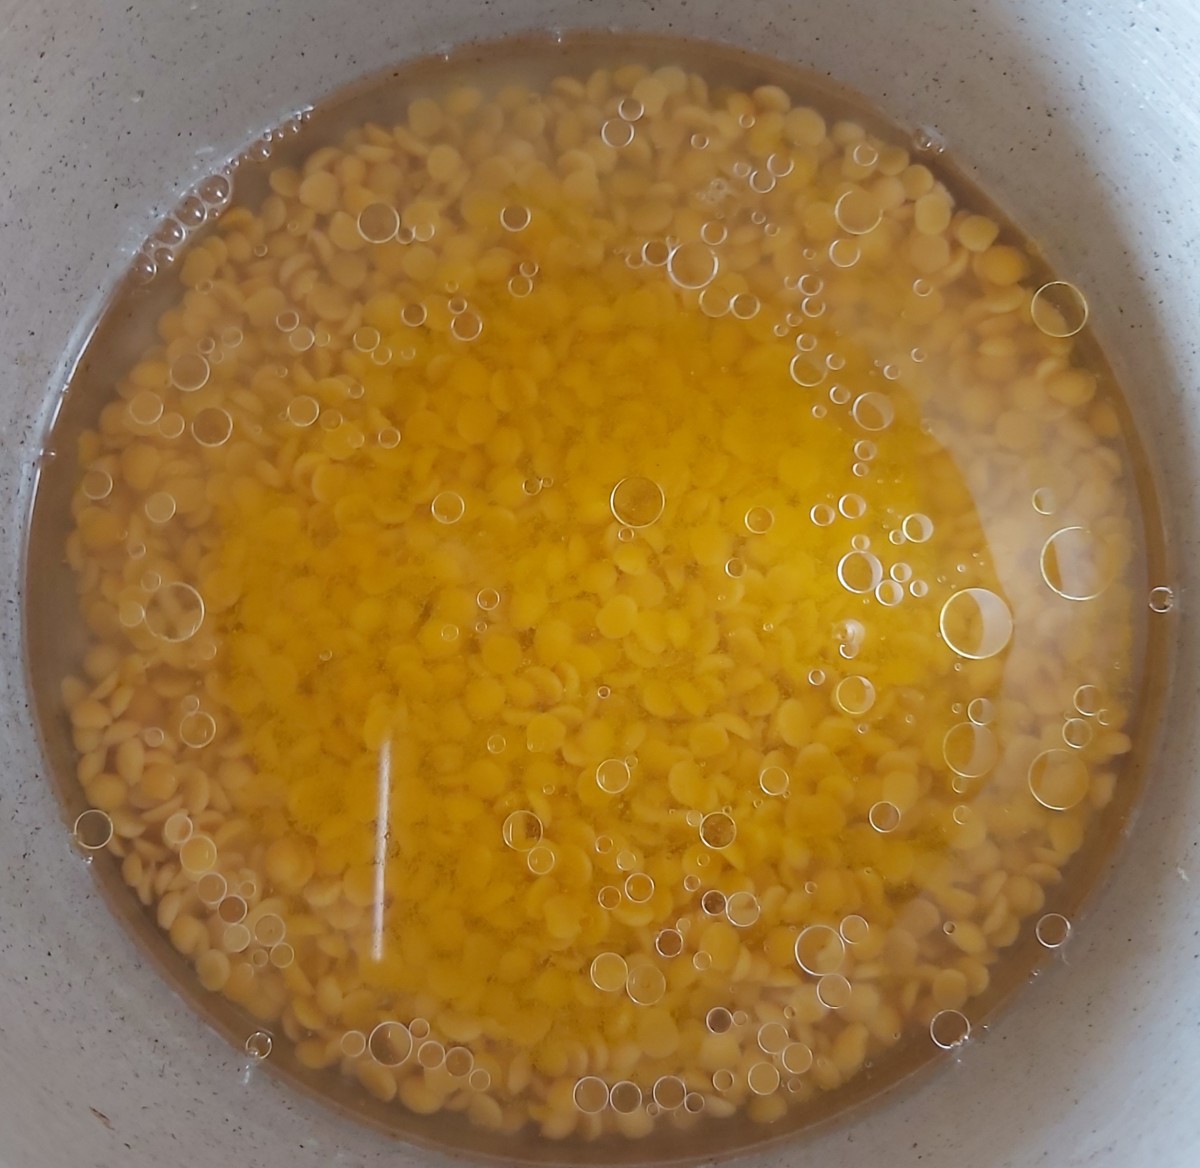 Add enough water to cook the lentils, then add 1/2 teaspoon of turmeric powder and 1 teaspoon of coconut oil (or ghee).